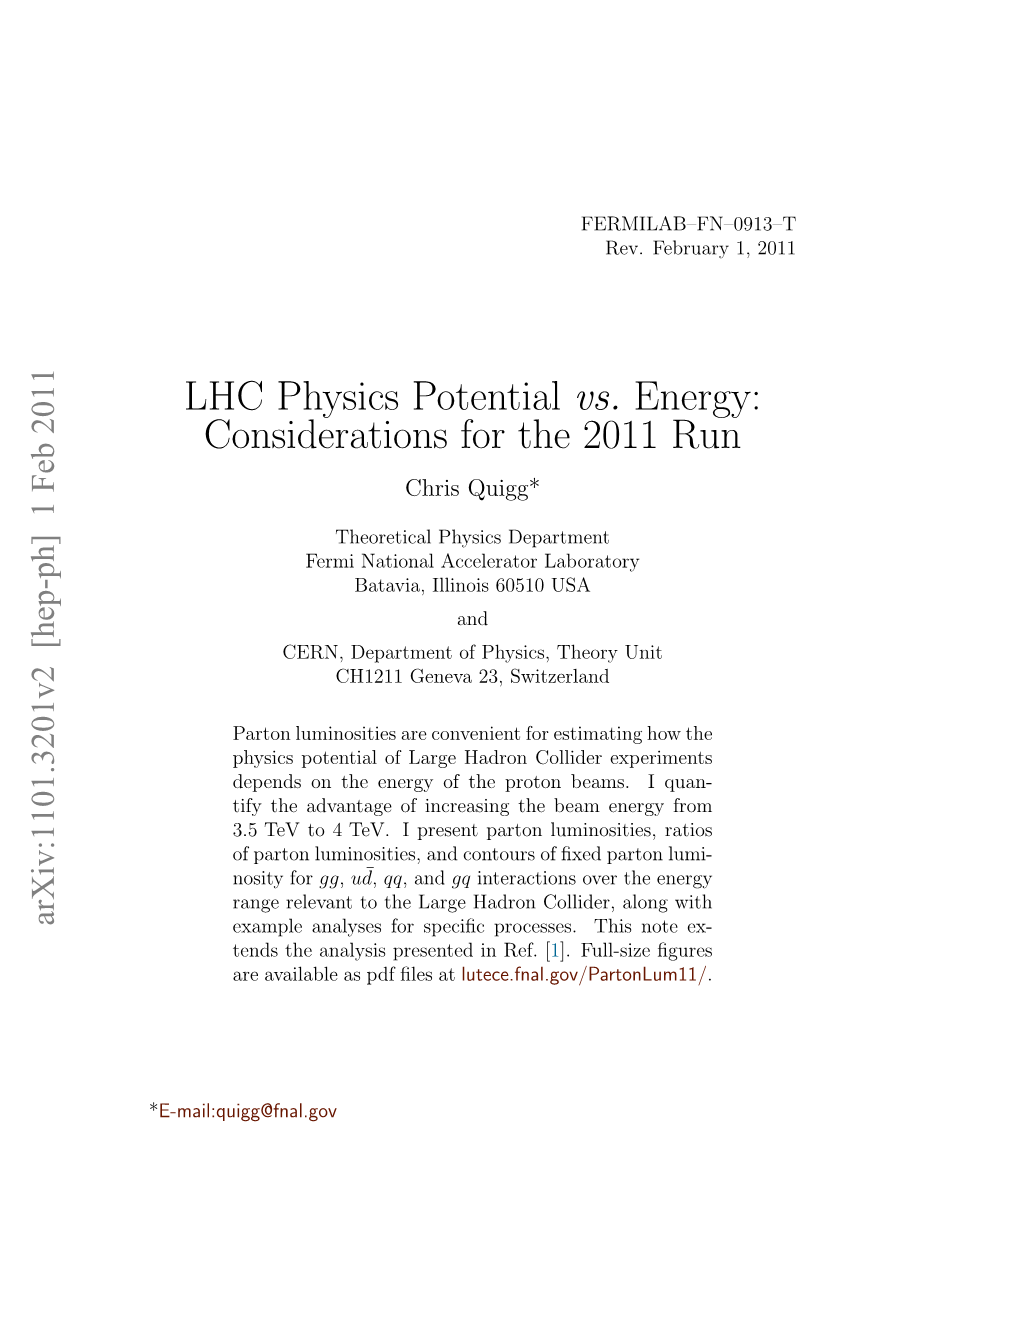 LHC Physics Potential Vs. Energy: Considerations for the 2011 Run Chris Quigg*